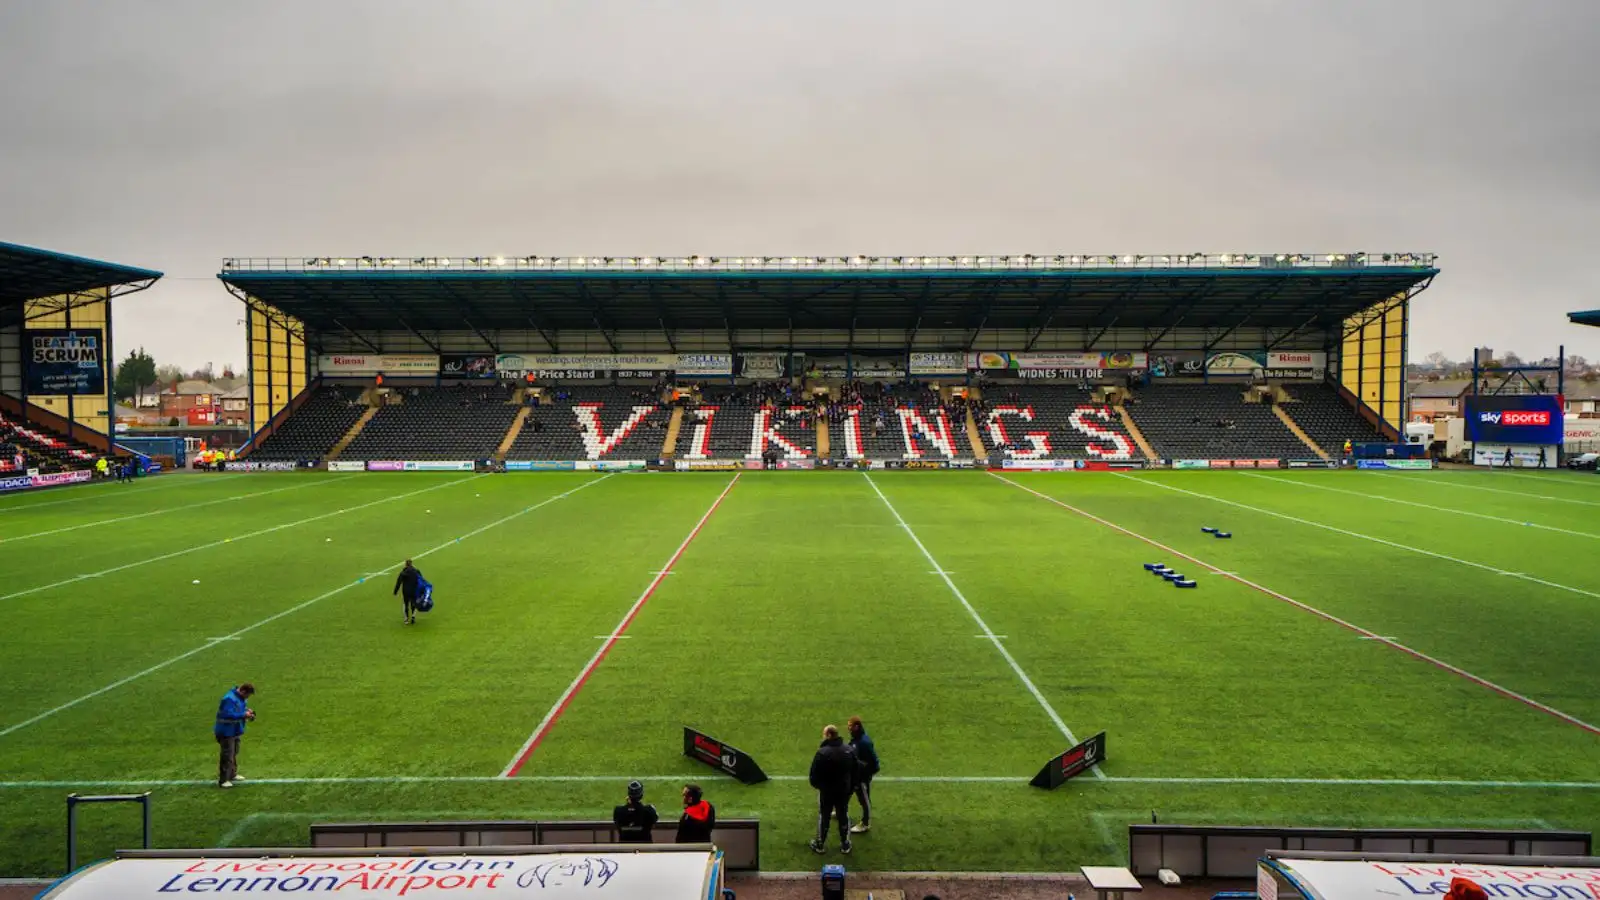 Widnes Vikings CEO takes aim at club’s supporters in extraordinary outburst